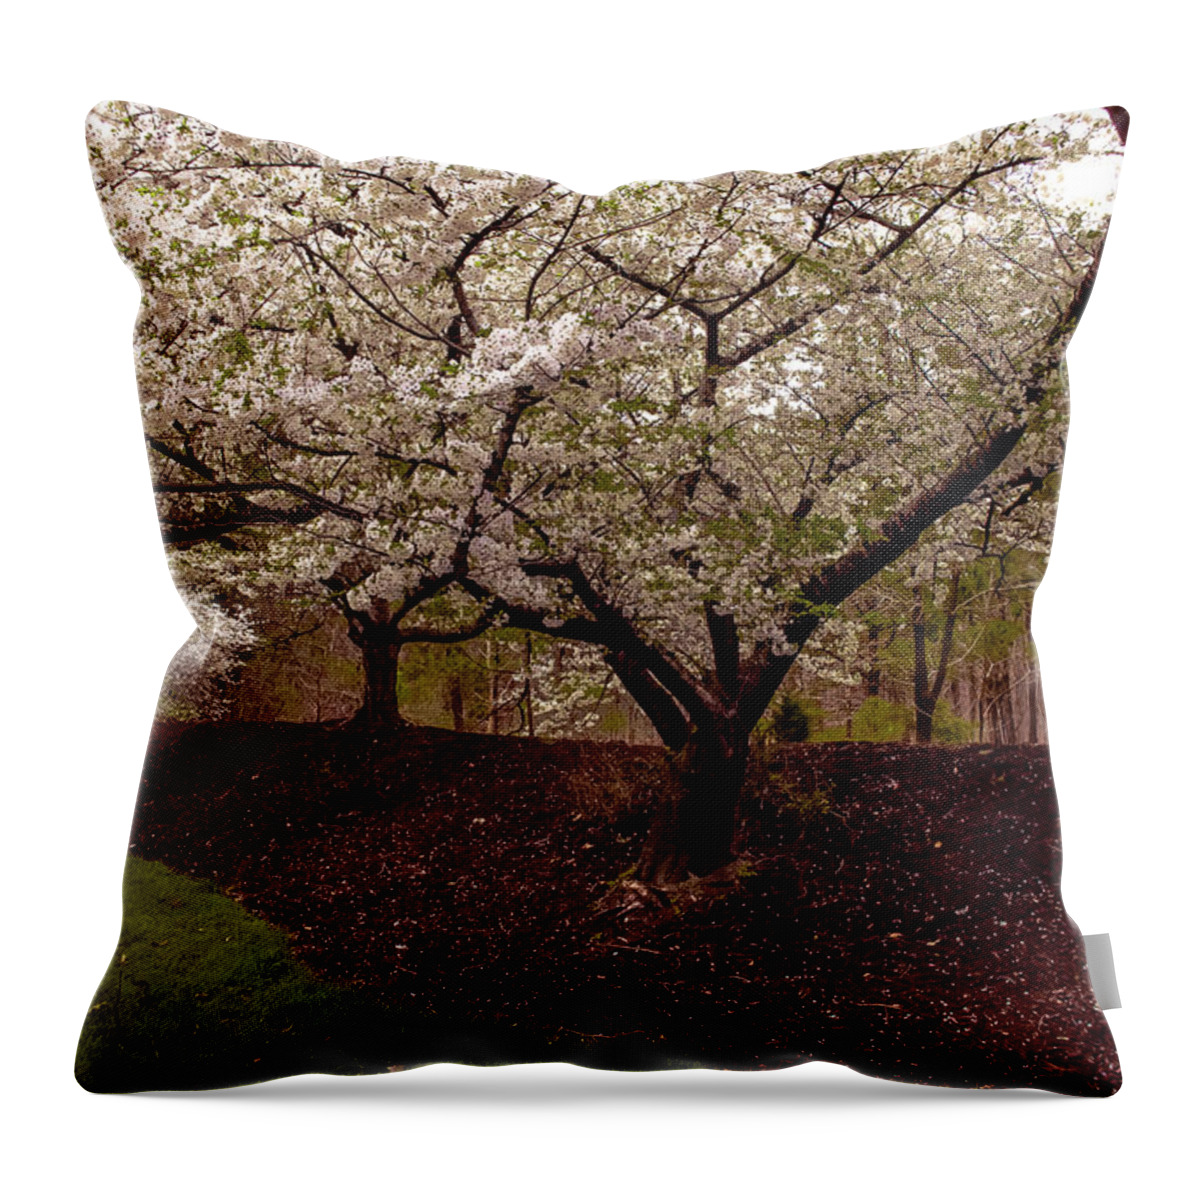 Cherry Blossoms Throw Pillow featuring the photograph Snowy Cherry Blossoms by Ola Allen